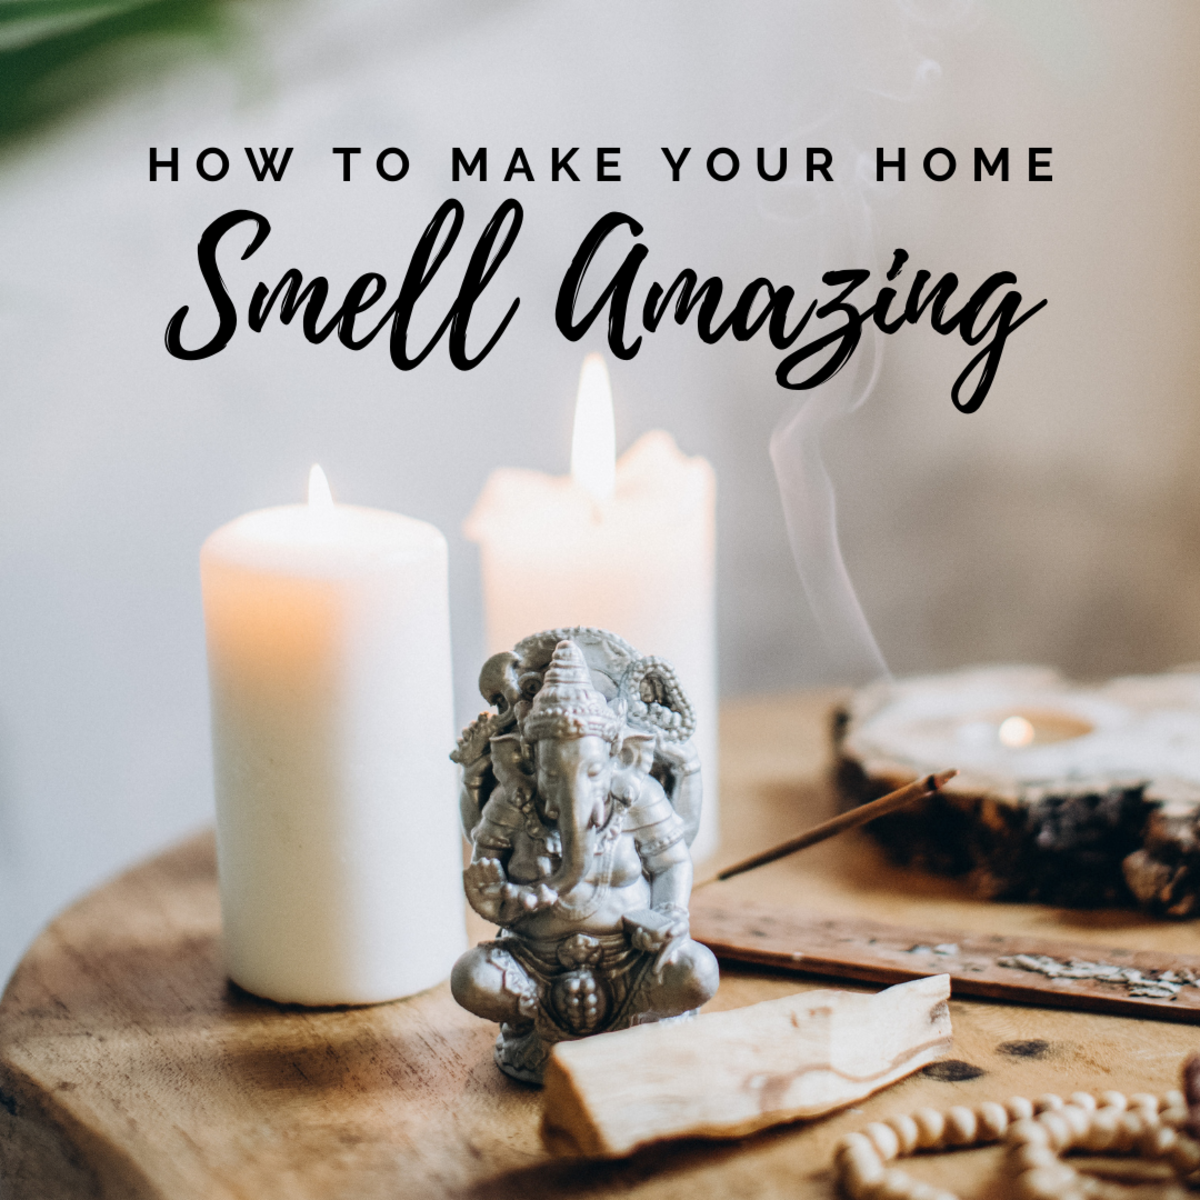 How to Make Your Home Smell Good